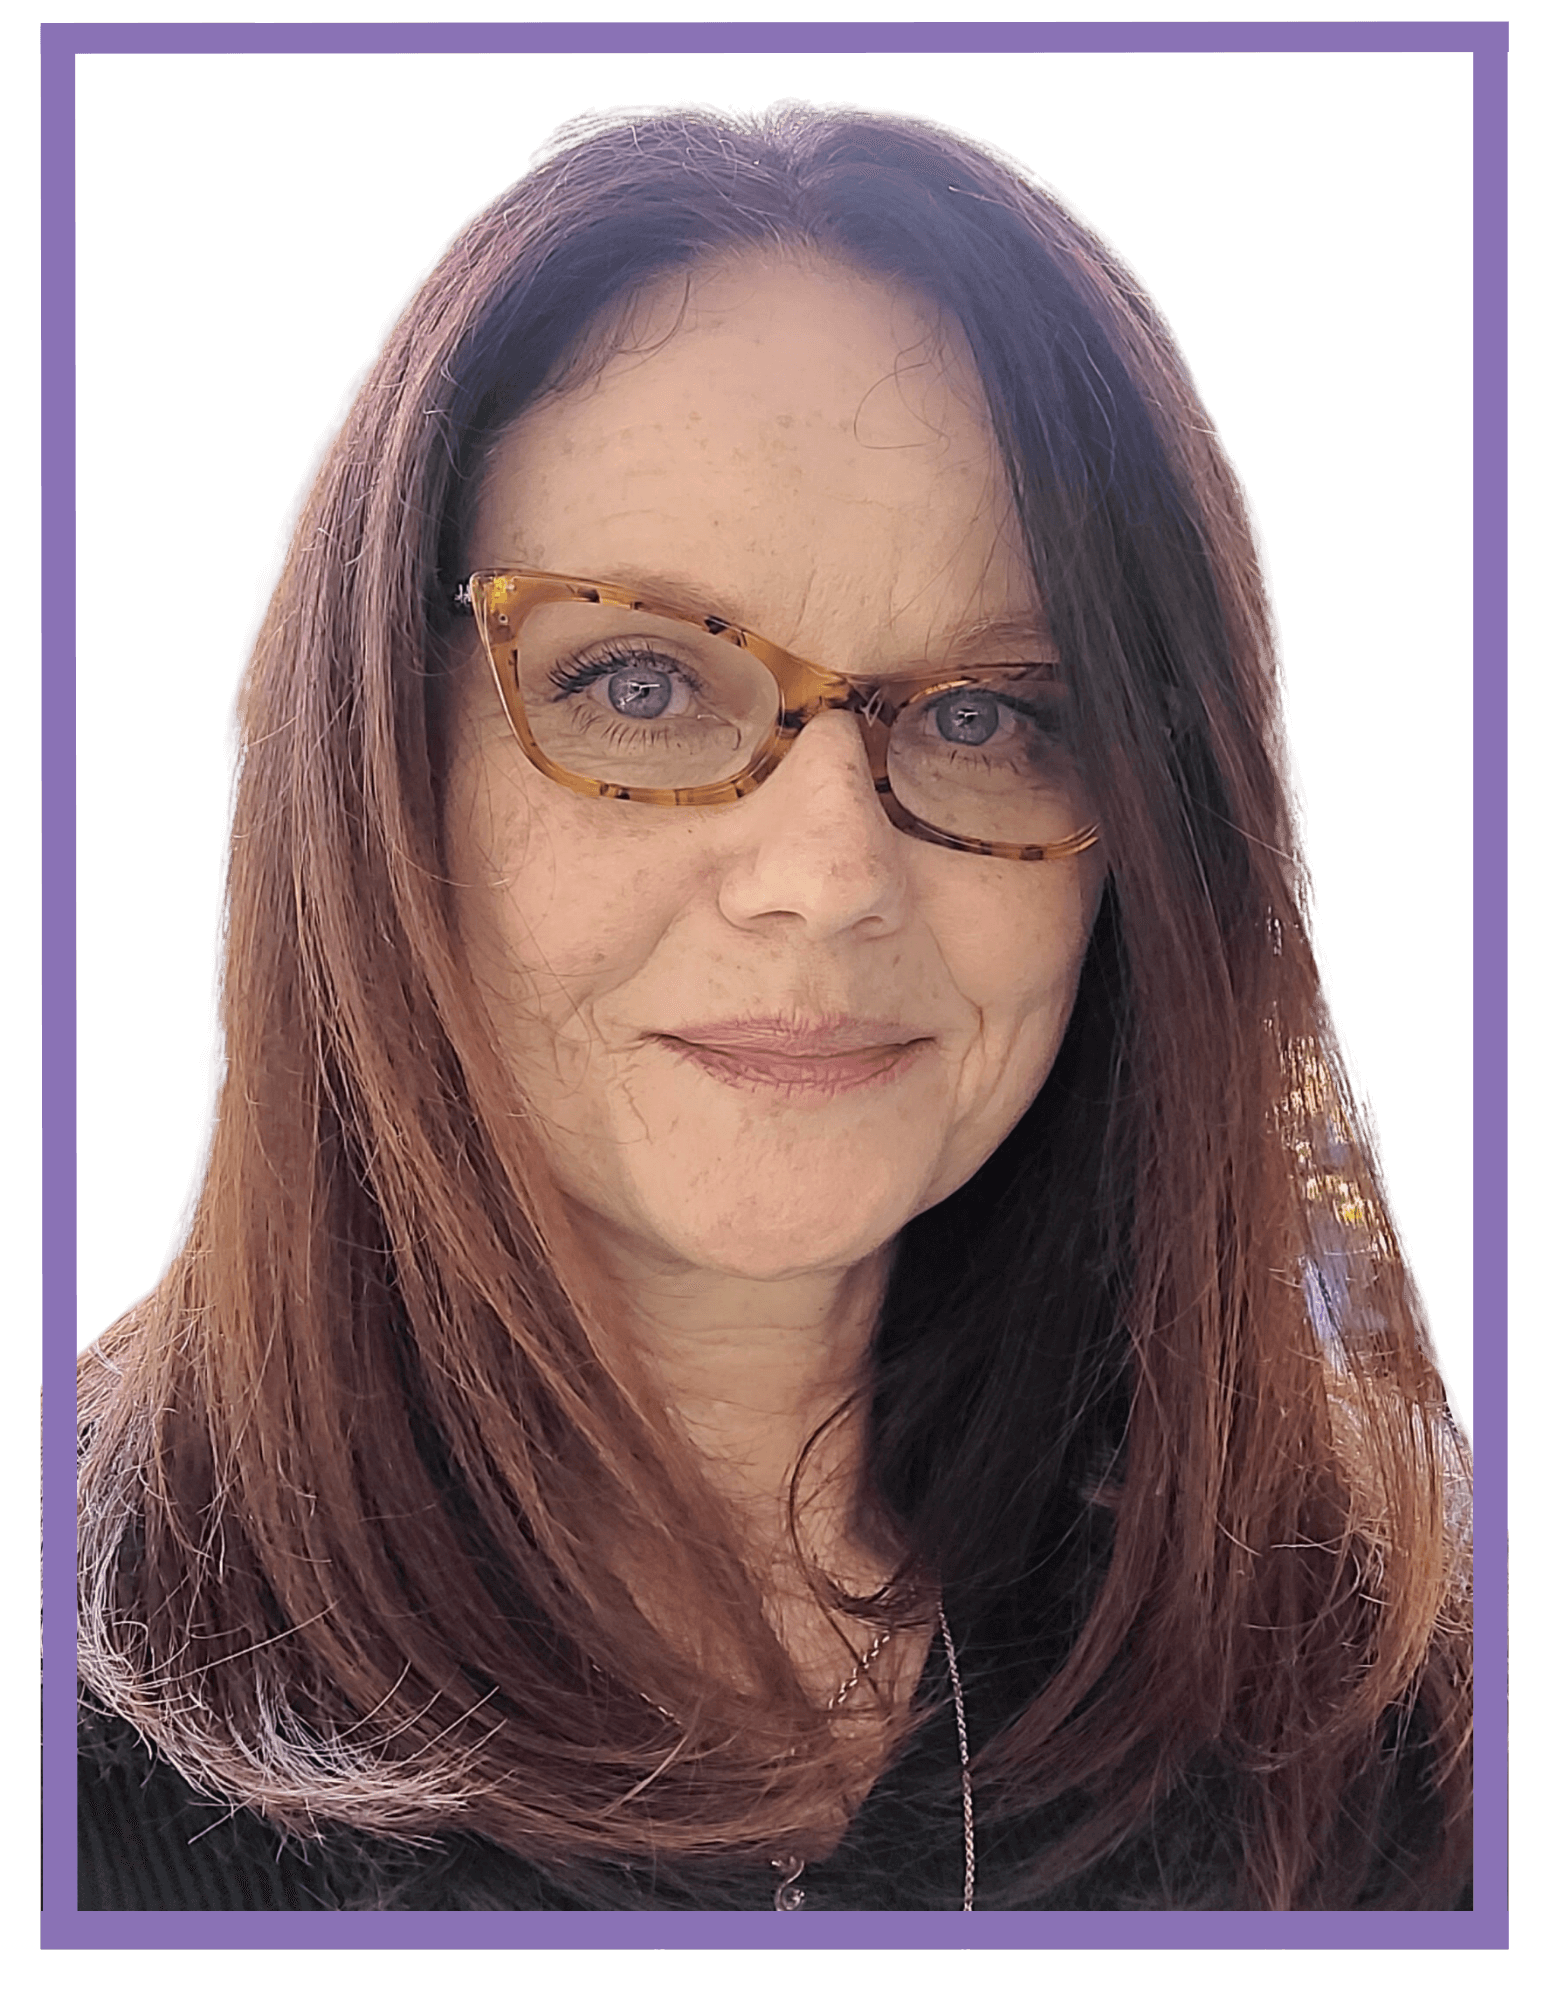 image of a woman with glasses softly smiling. image has a purple border